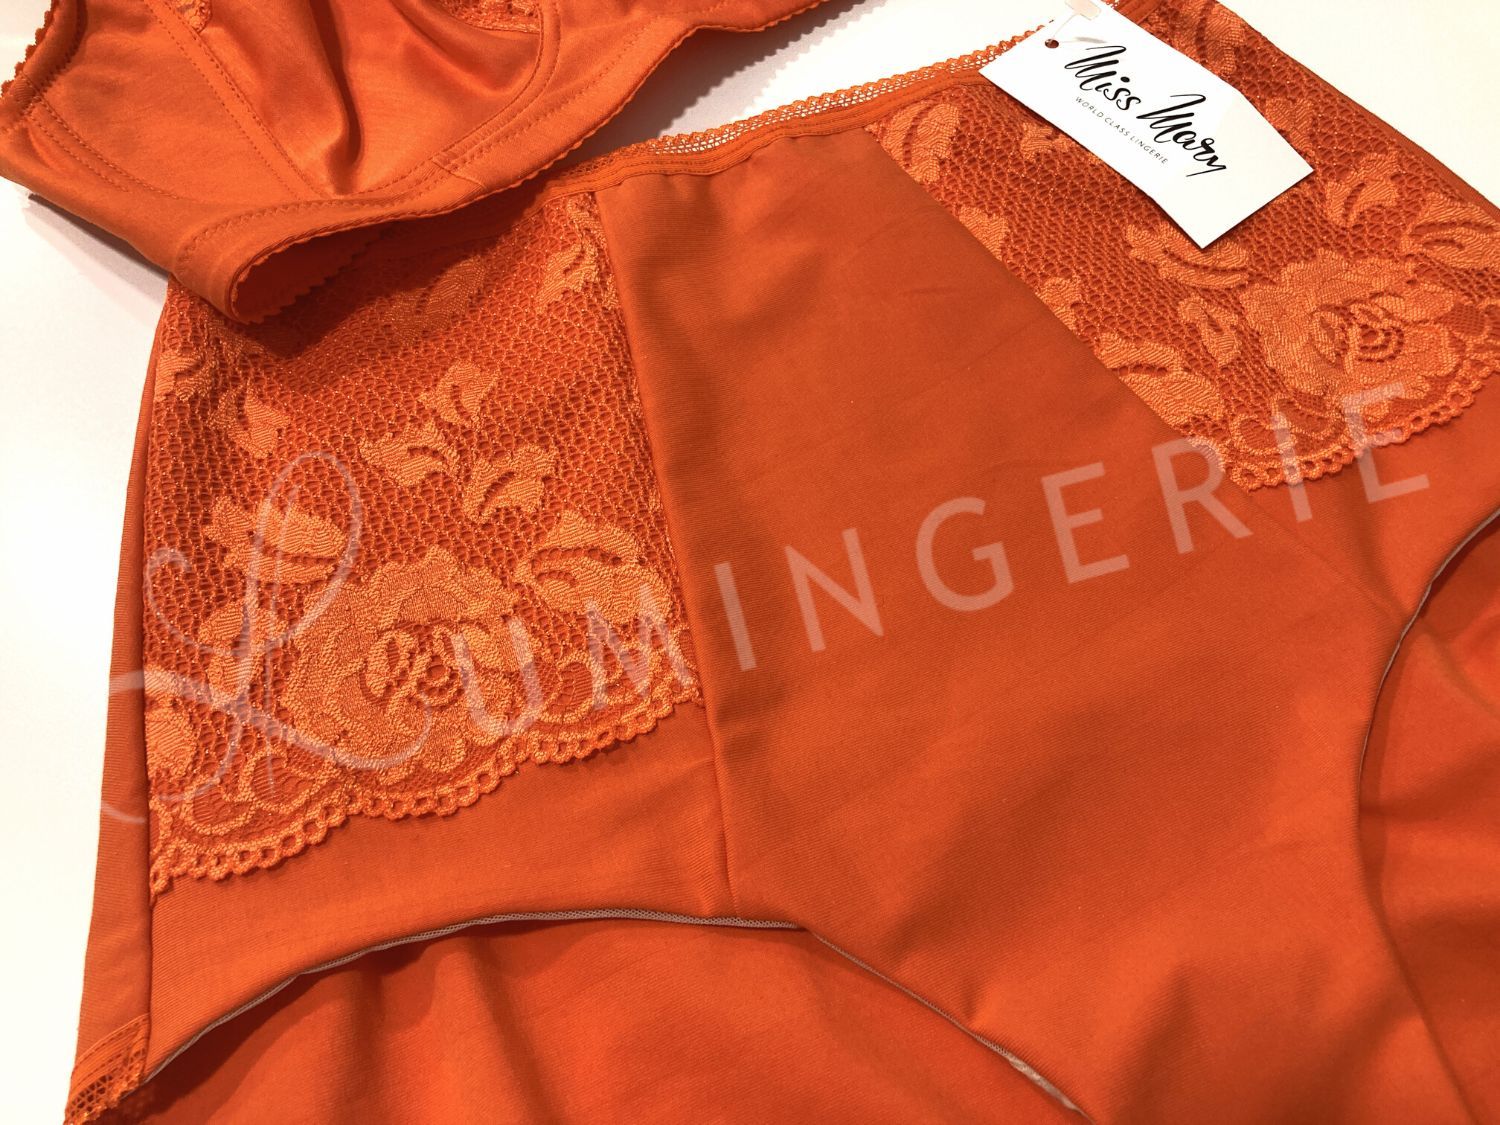 Miss Mary Lovely Lace Support Brief Orange  Lumingerie bras and underwear  for big busts